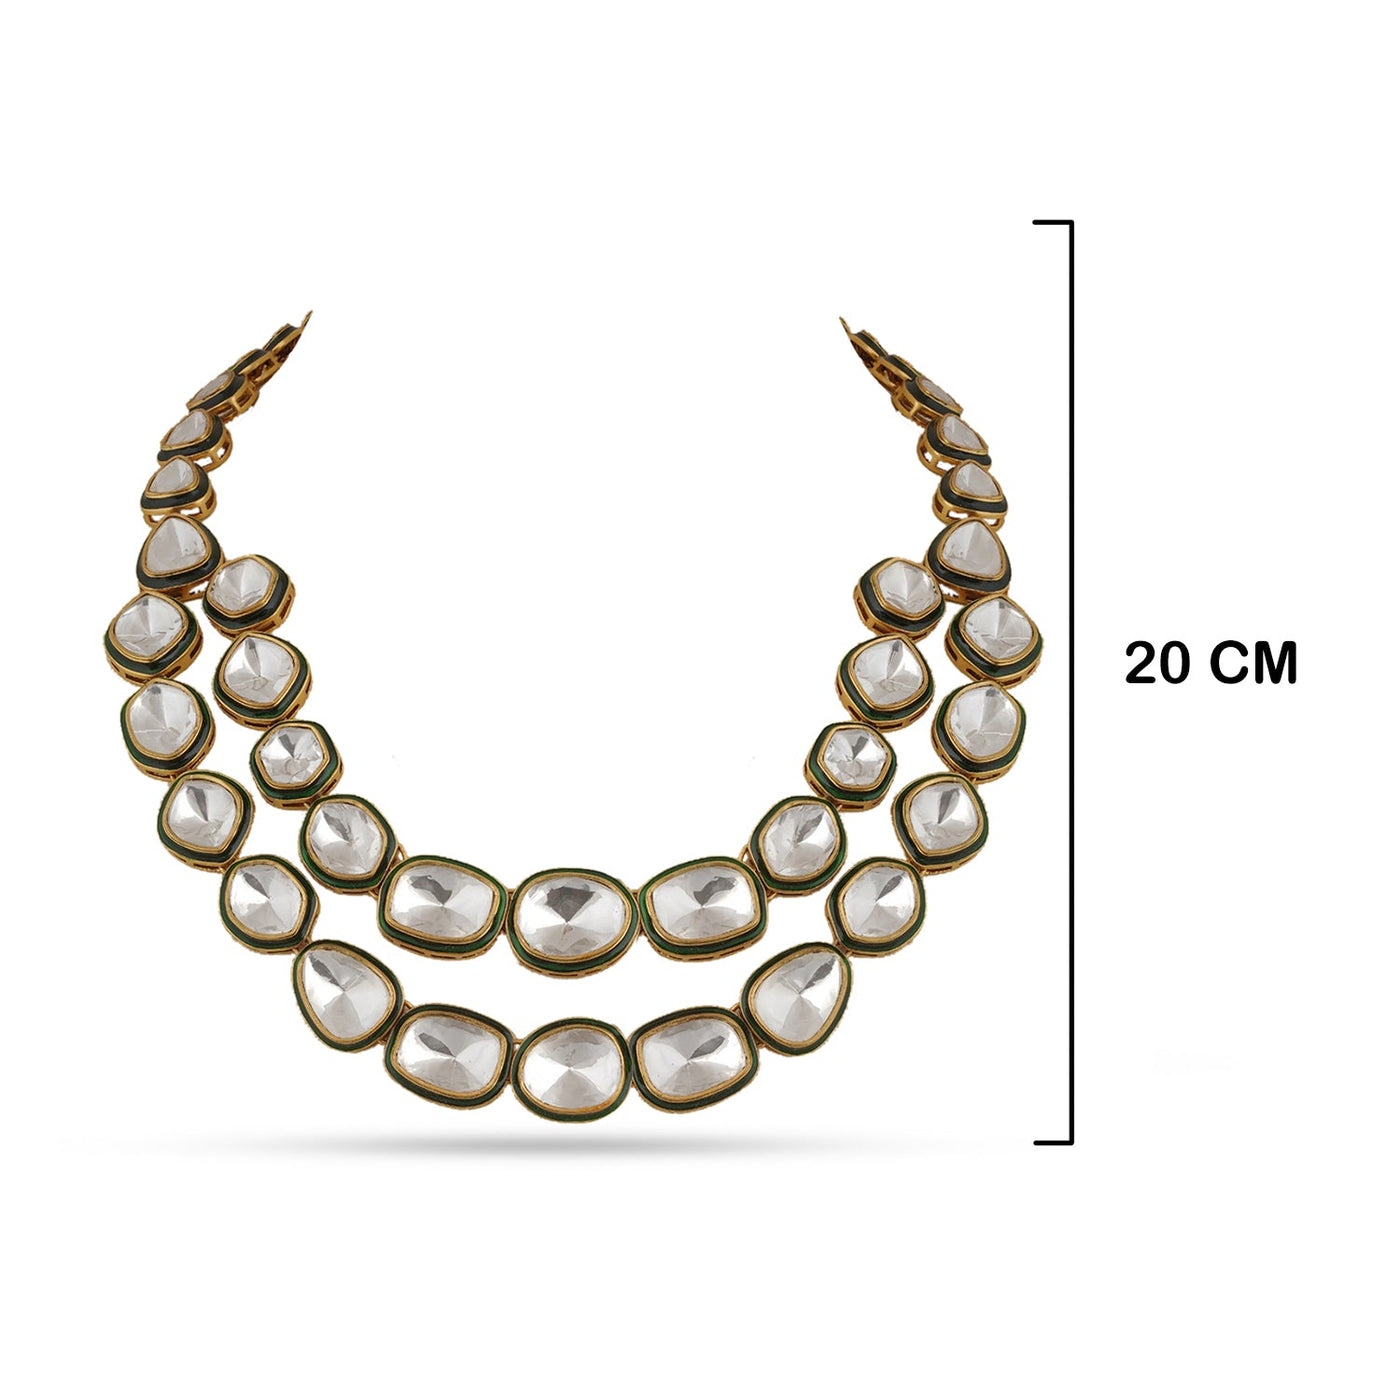 Double Layer Polki Necklace with measurements in cm. 20cm.